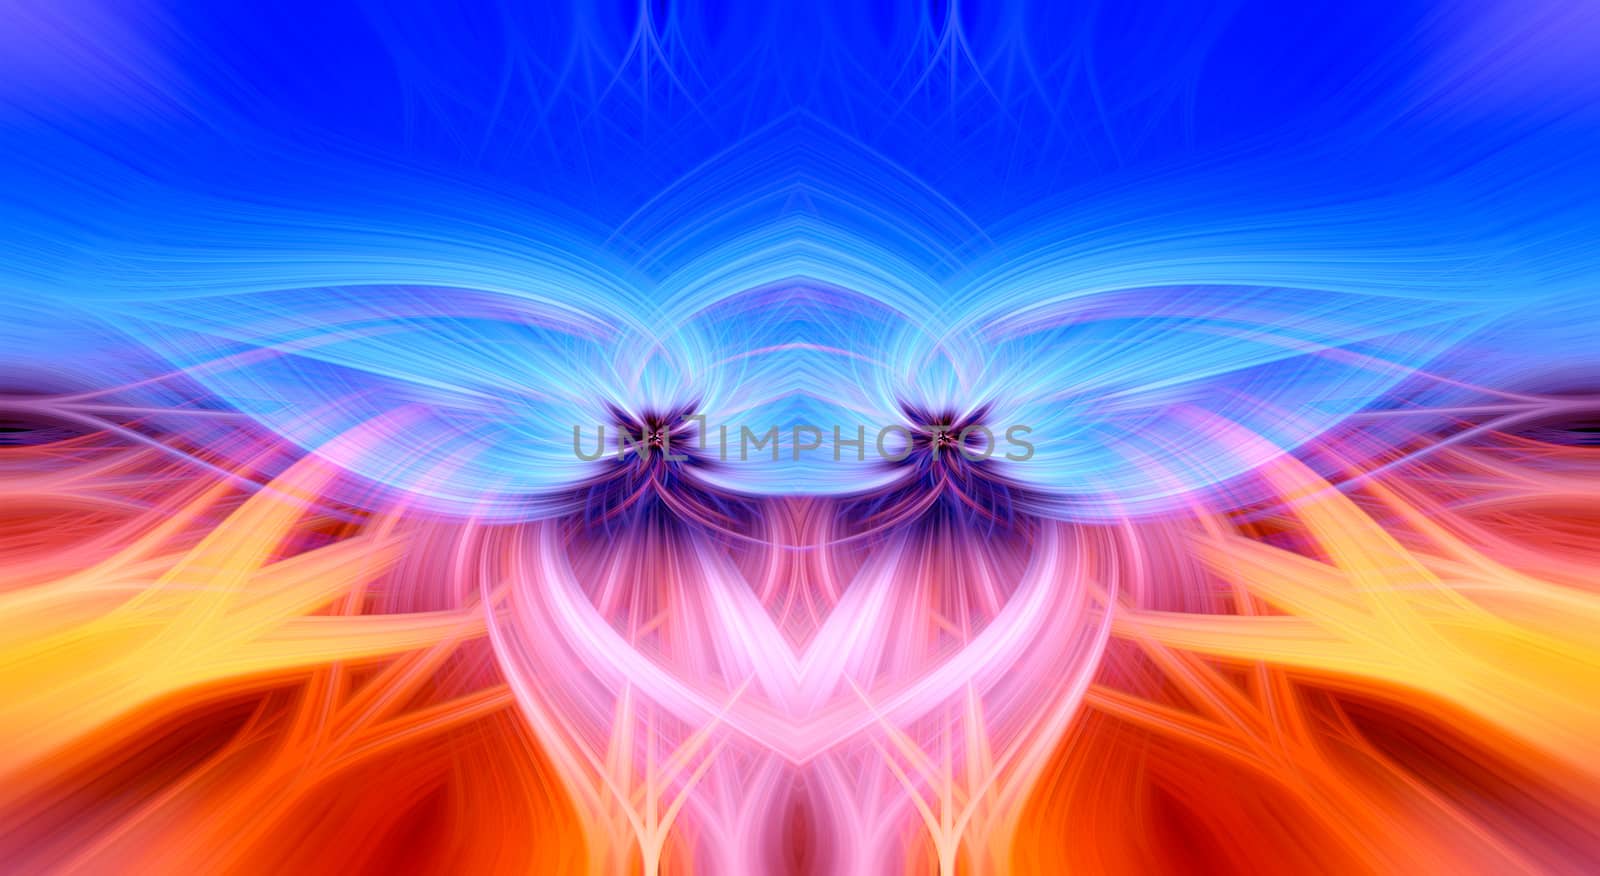 Beautiful abstract intertwined 3d fibers forming an ornament out of various symmetrical shapes. Purple, pink, red, orange, and blue colors. Illustration.